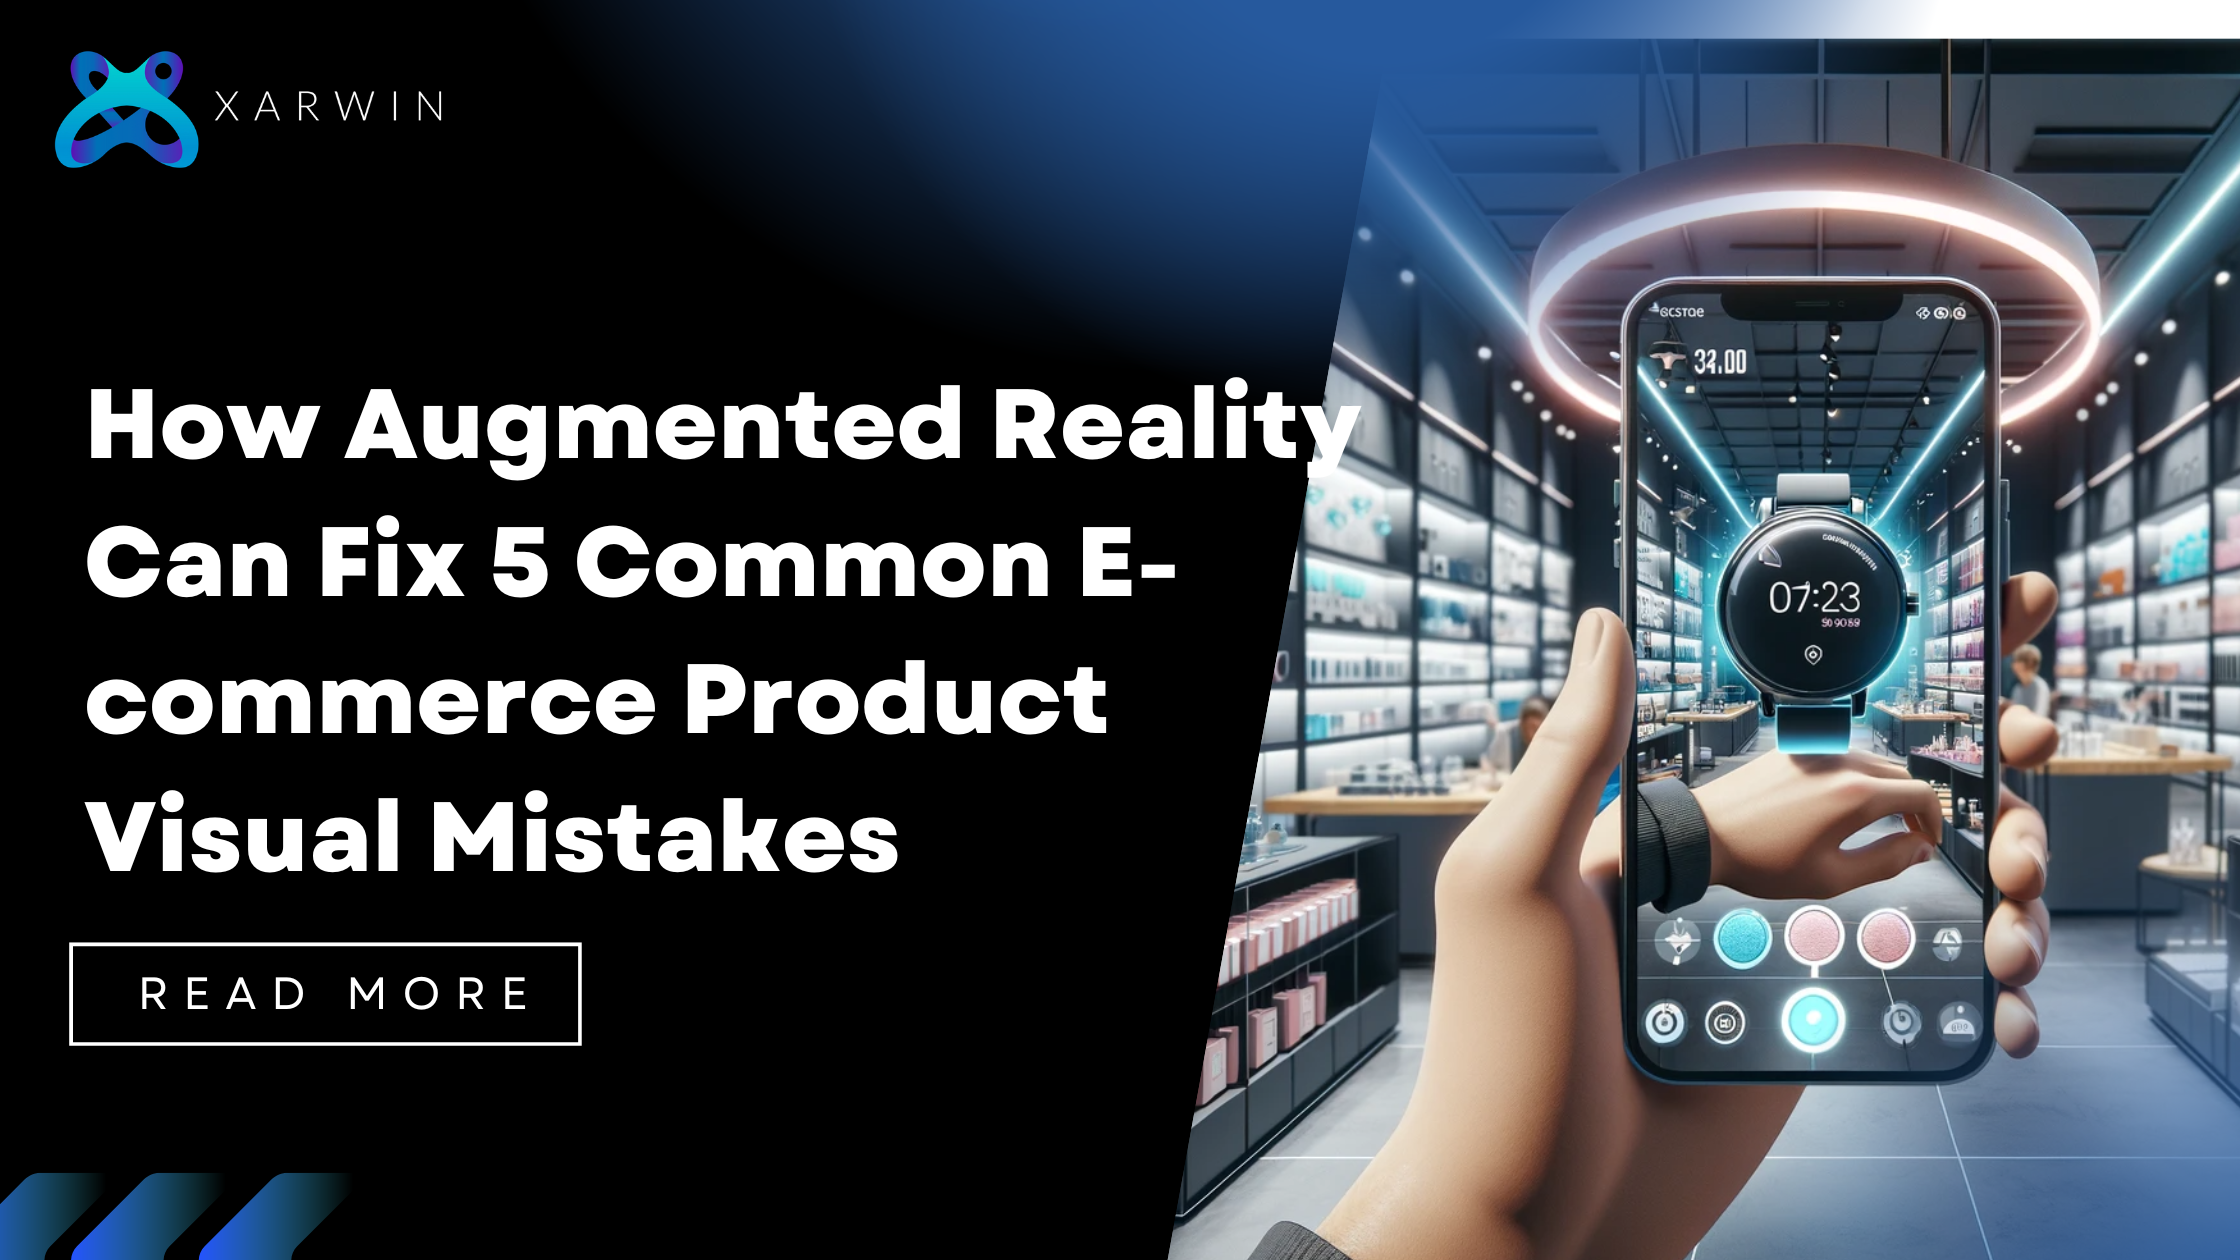 How Augmented Reality Can Fix 5 Common E-commerce Product Visual Mistakes